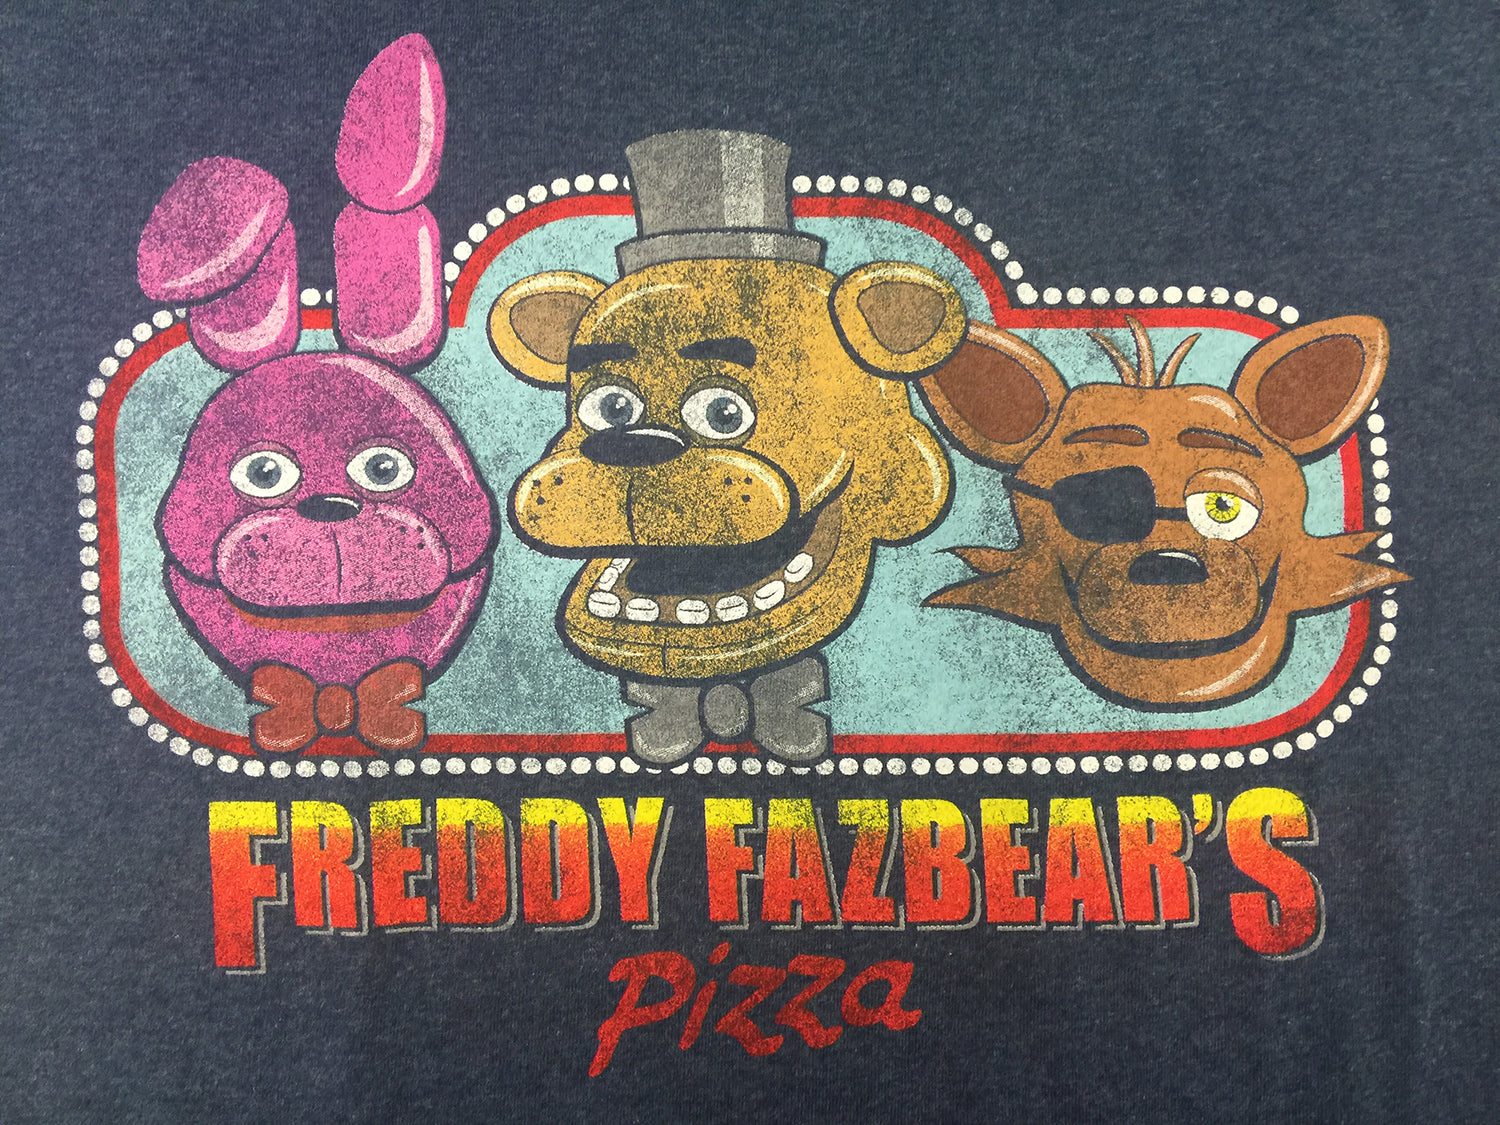 Five Nights at Freddy's Adult Clothing in Five Nights at Freddy's Apparel 